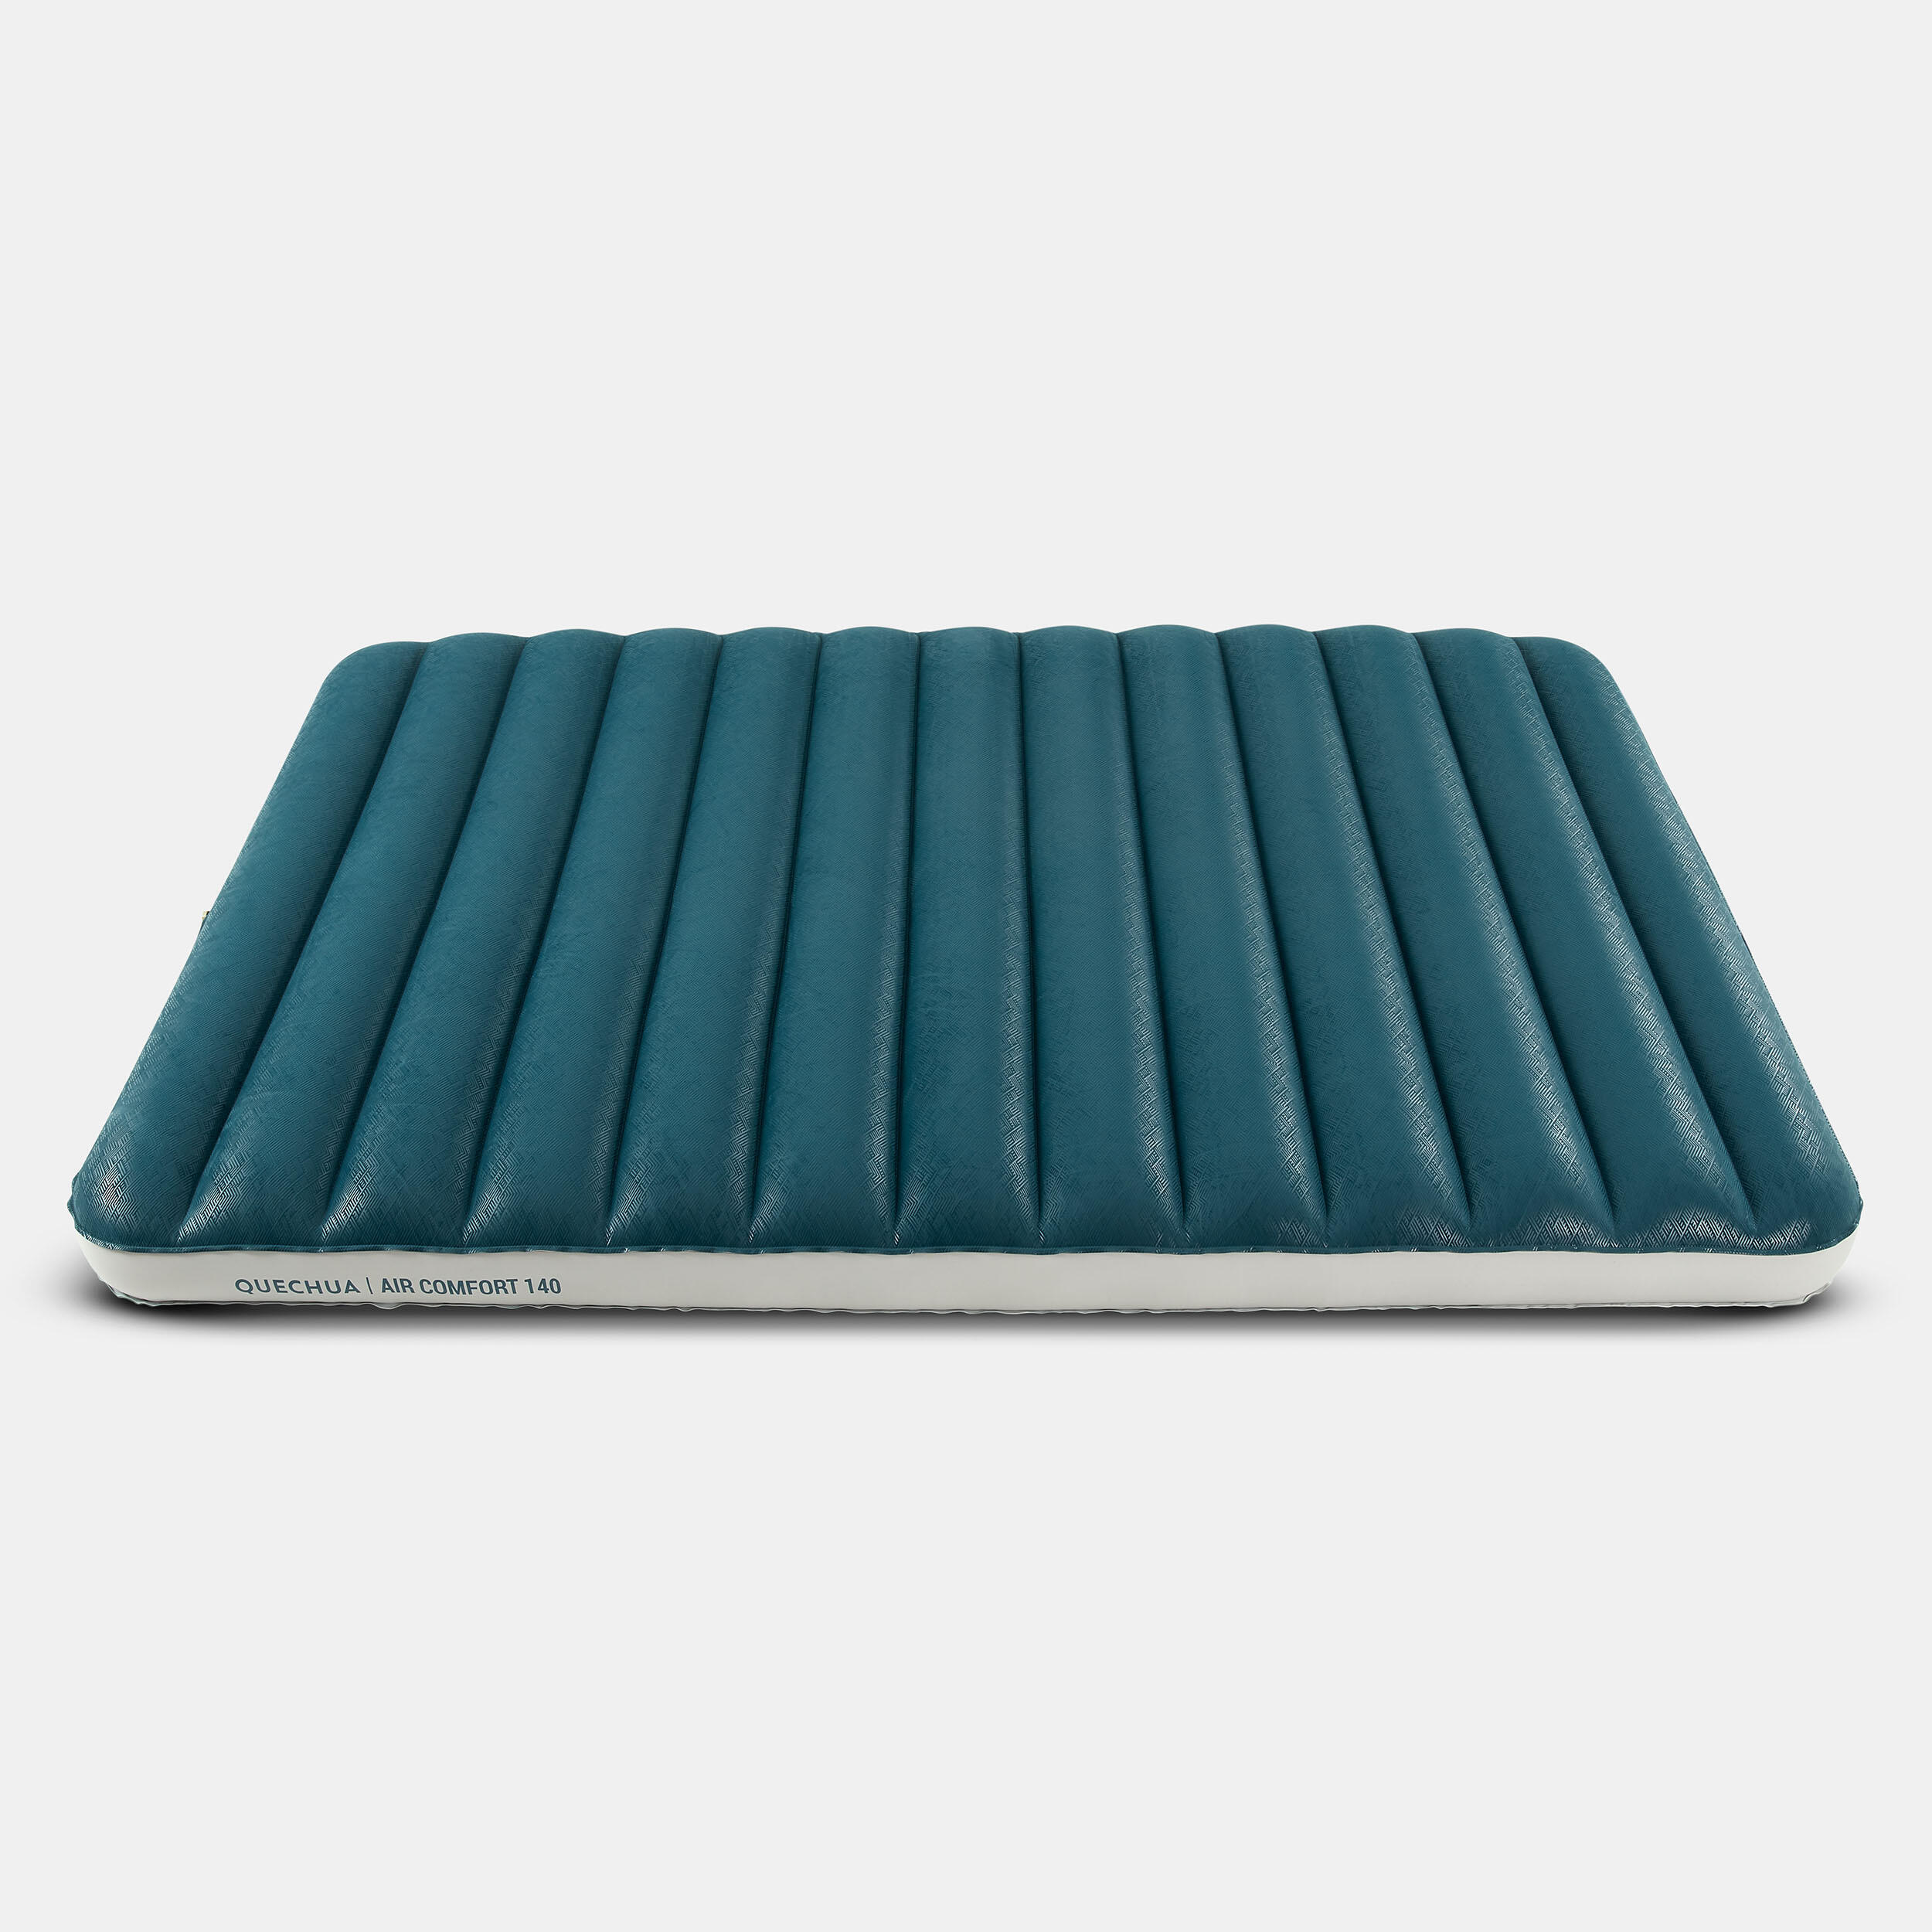 Inflatable Camping Mattress Air Comfort 140 cm 2 People 6/10